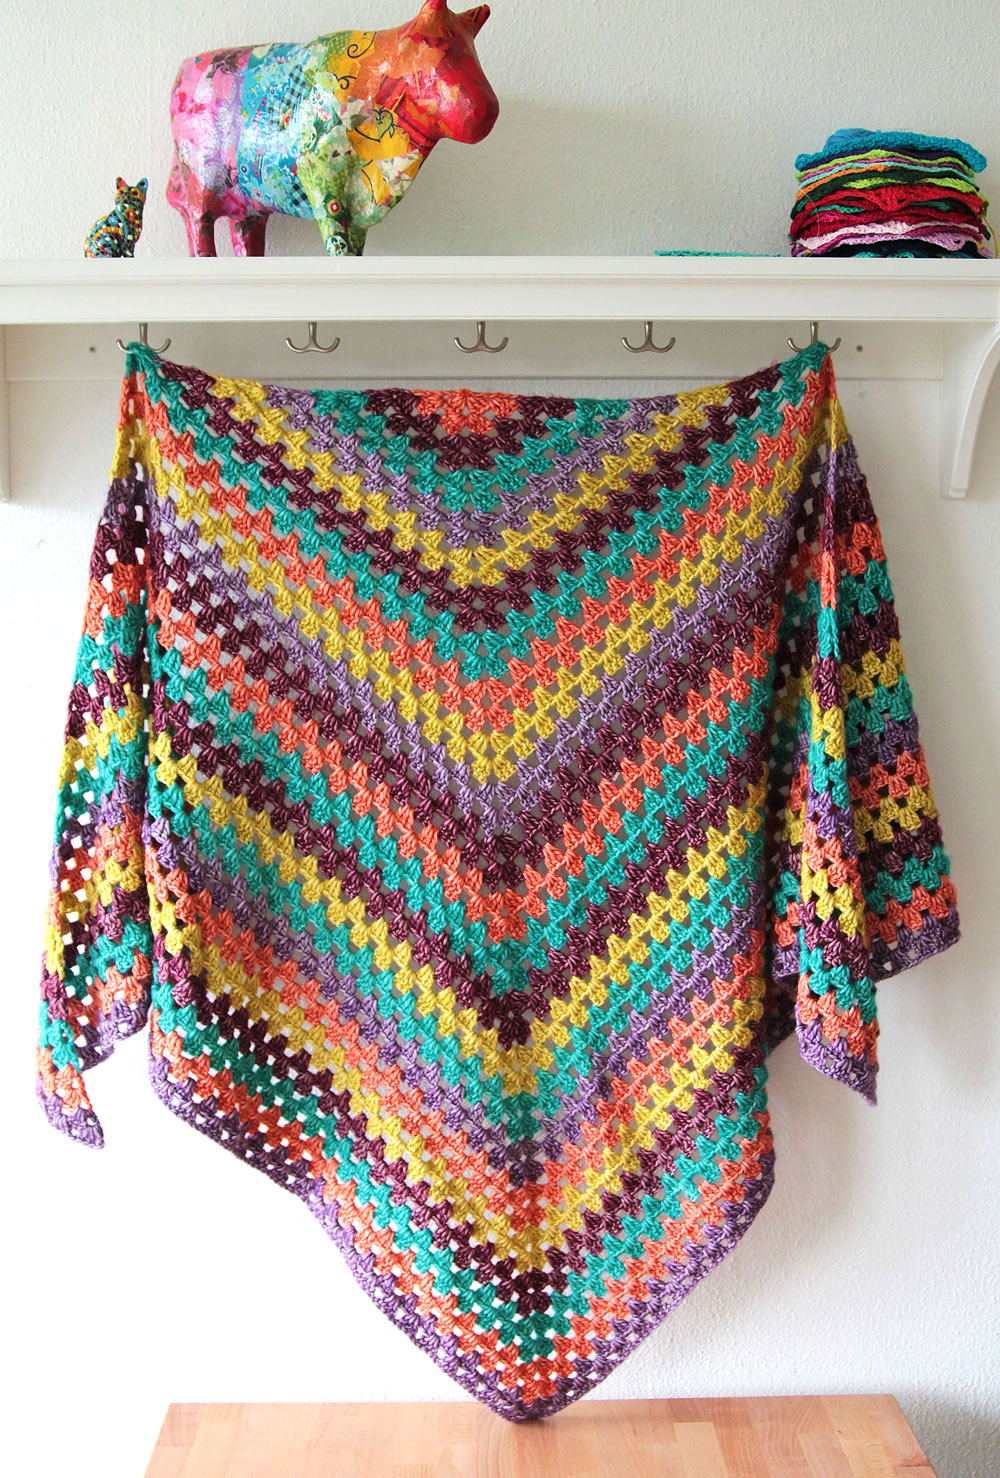 Easy Crochet Shawl Pattern Quick And Easy Pattern The Stonewashed Xl Granny Winter Shawl